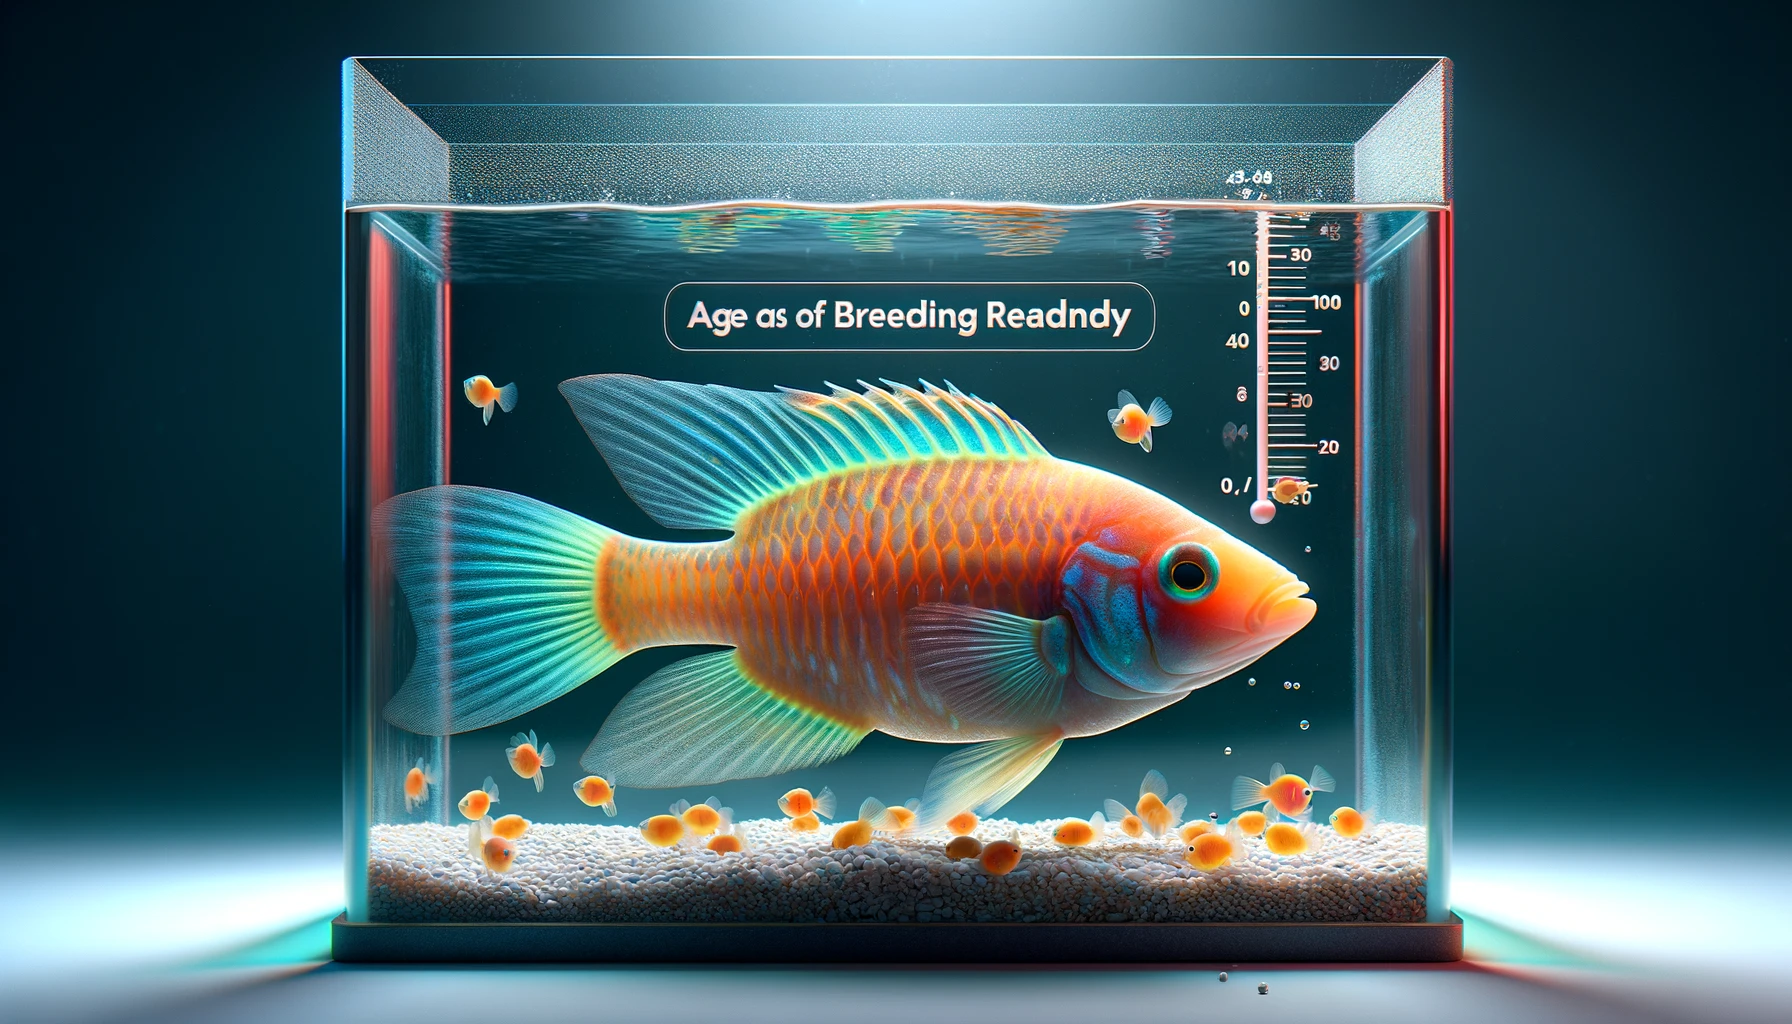 GloFish at the age of breeding readiness. The image should focus on a mature GloFish, displaying signs of reproductive maturi